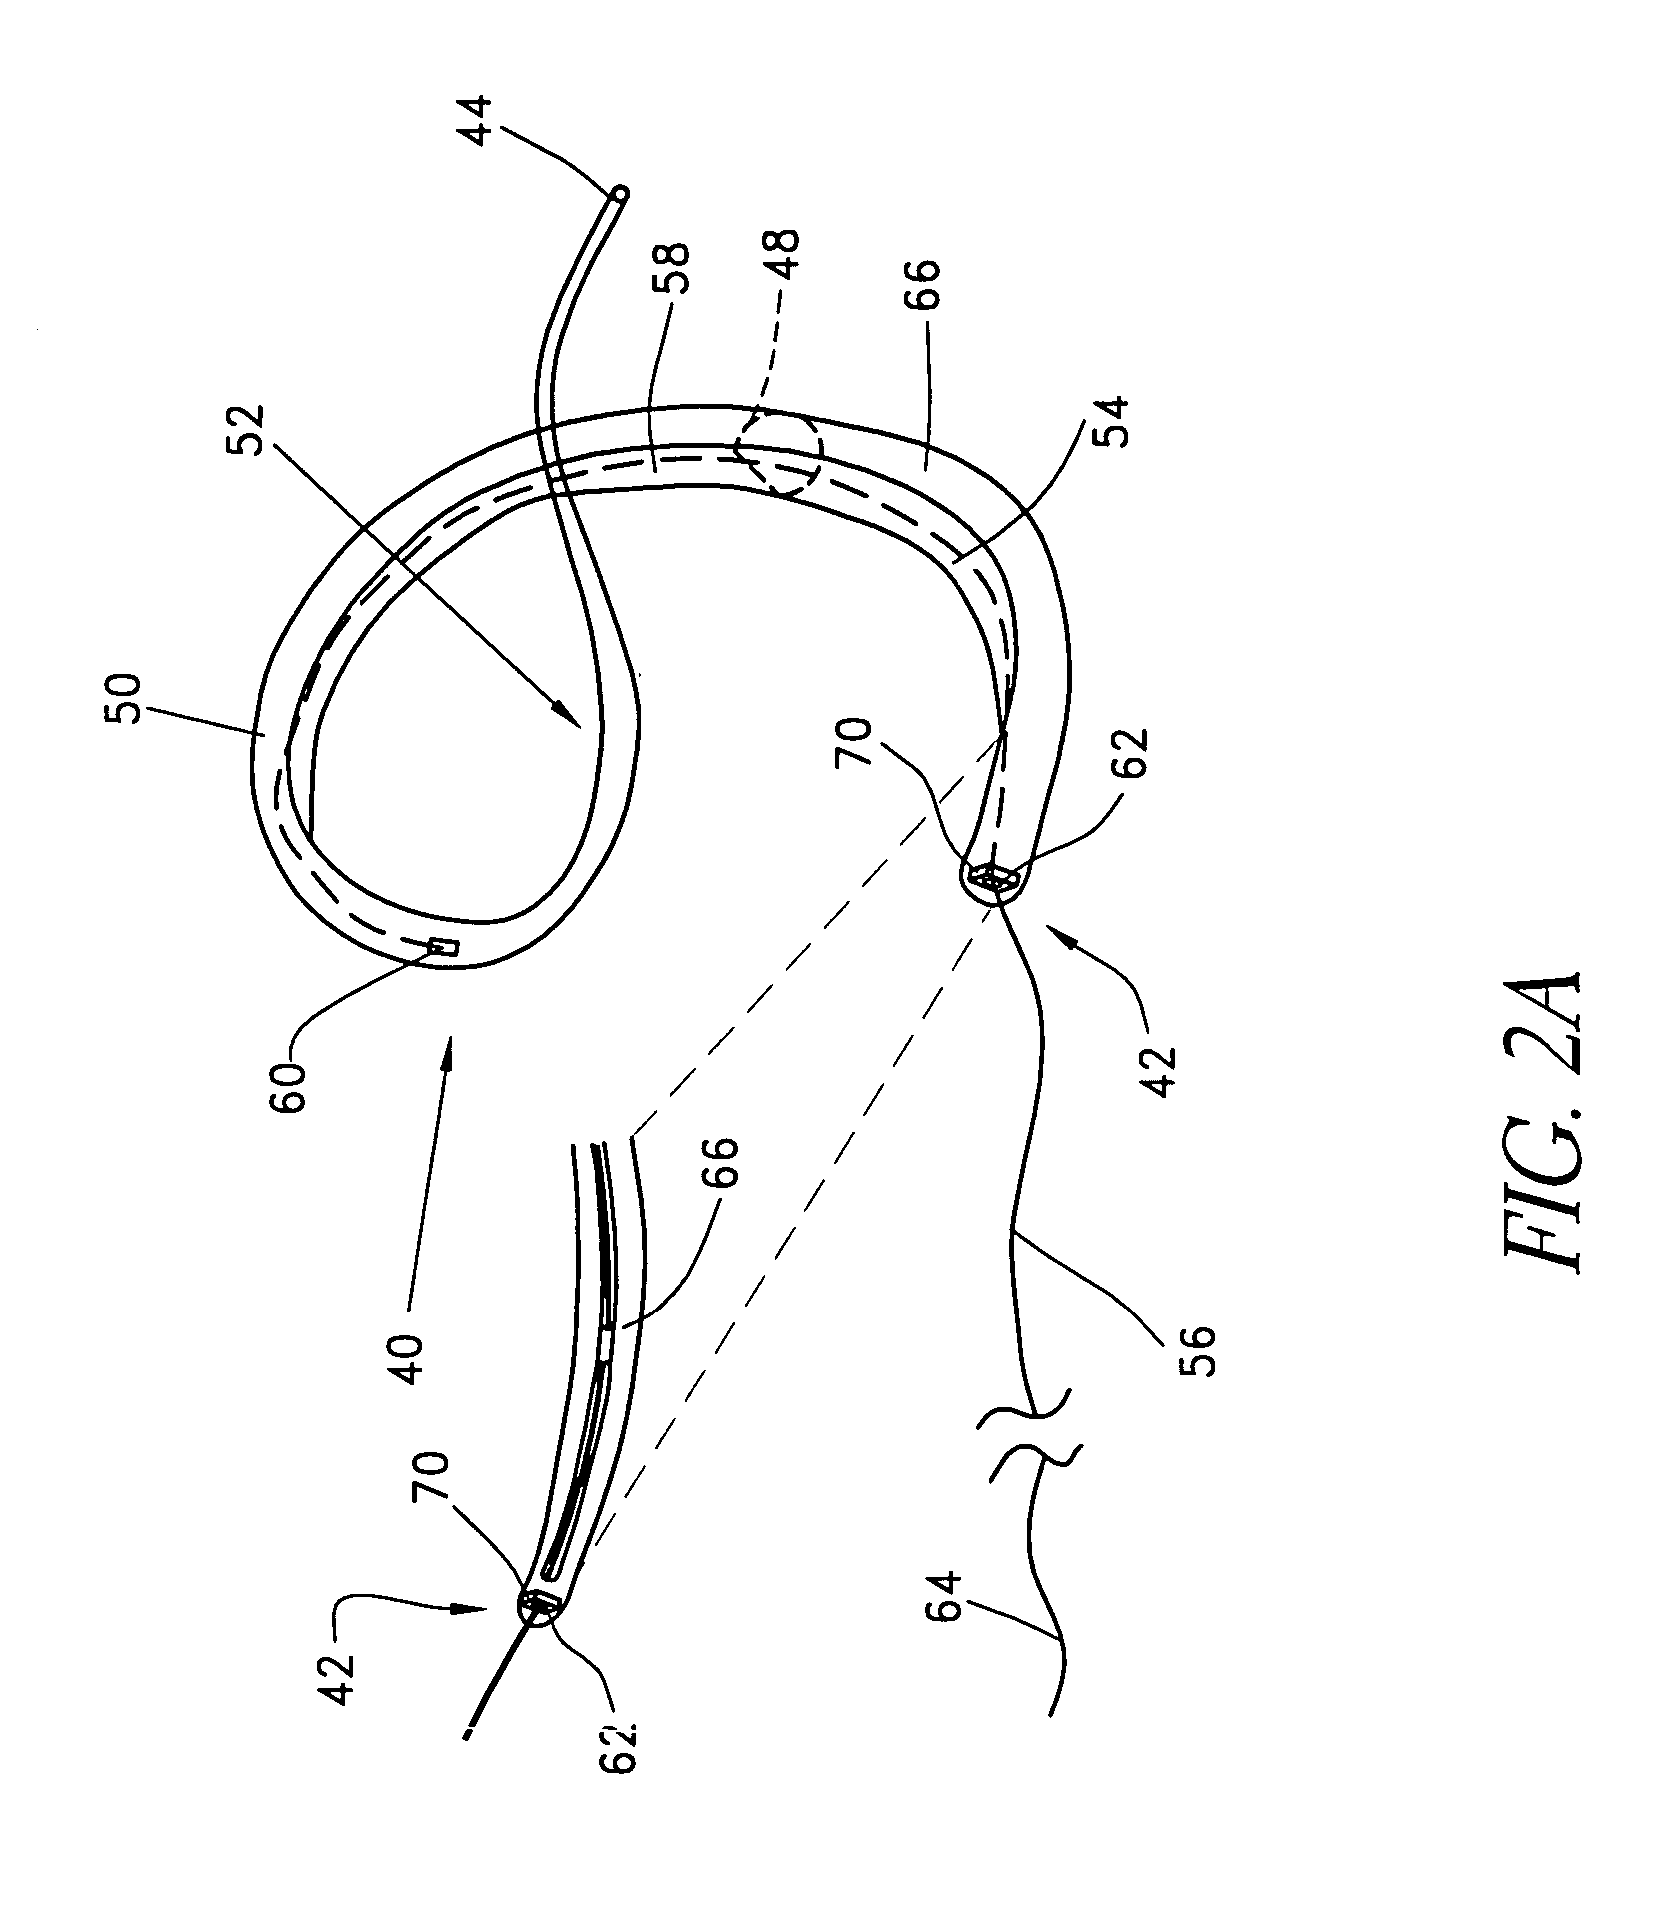 Remotely activated mitral annuloplasty system and methods